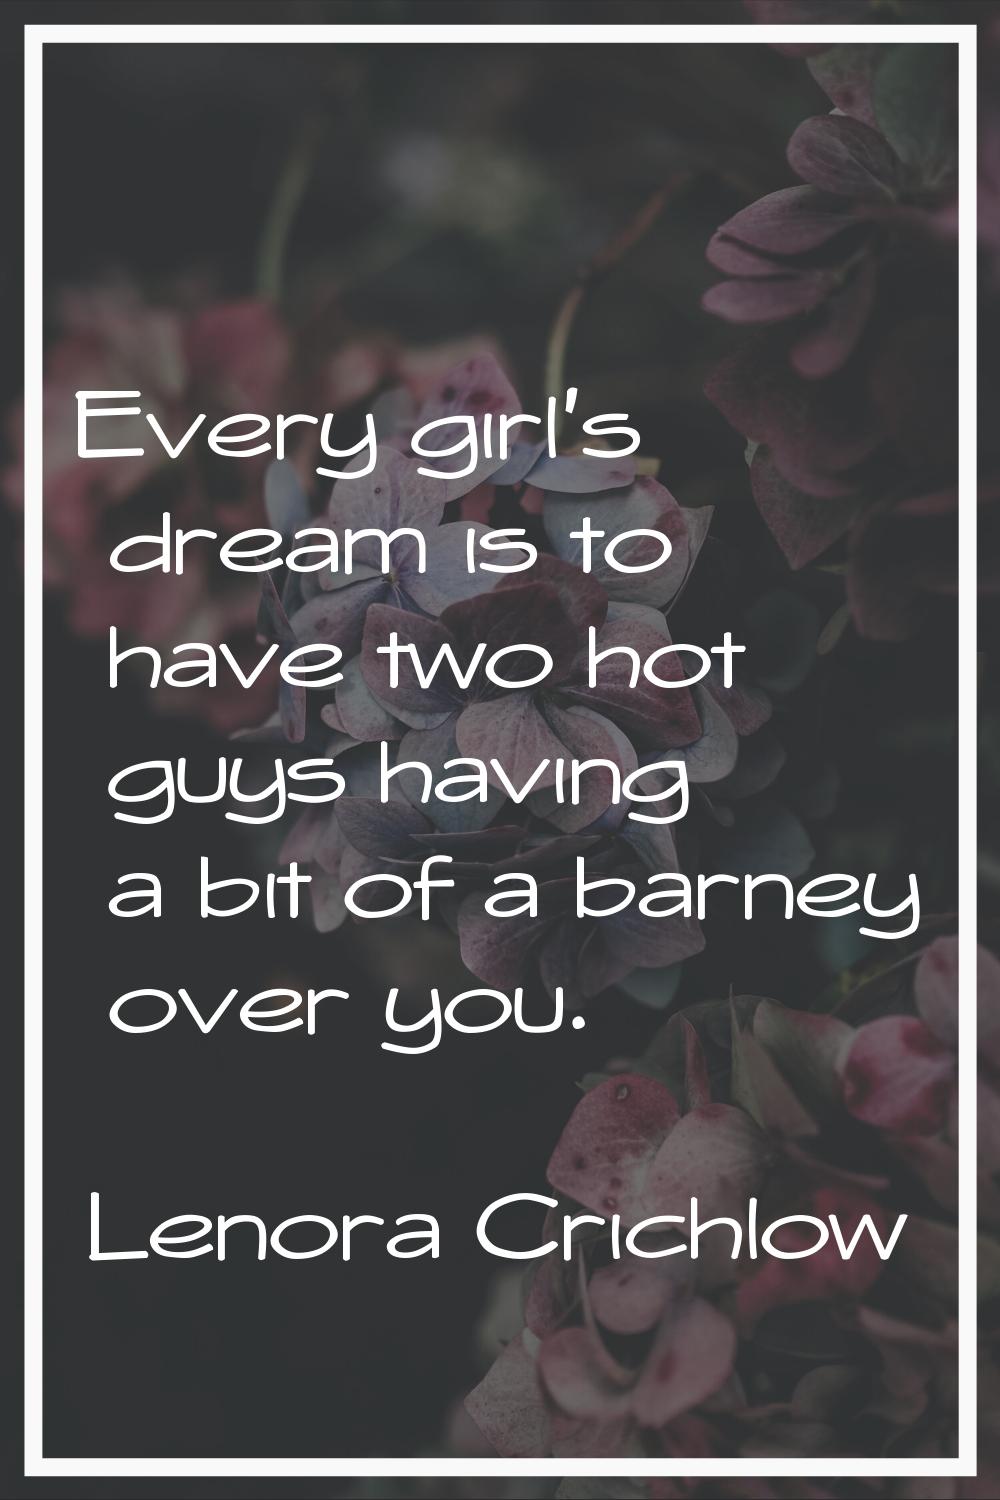 Every girl's dream is to have two hot guys having a bit of a barney over you.